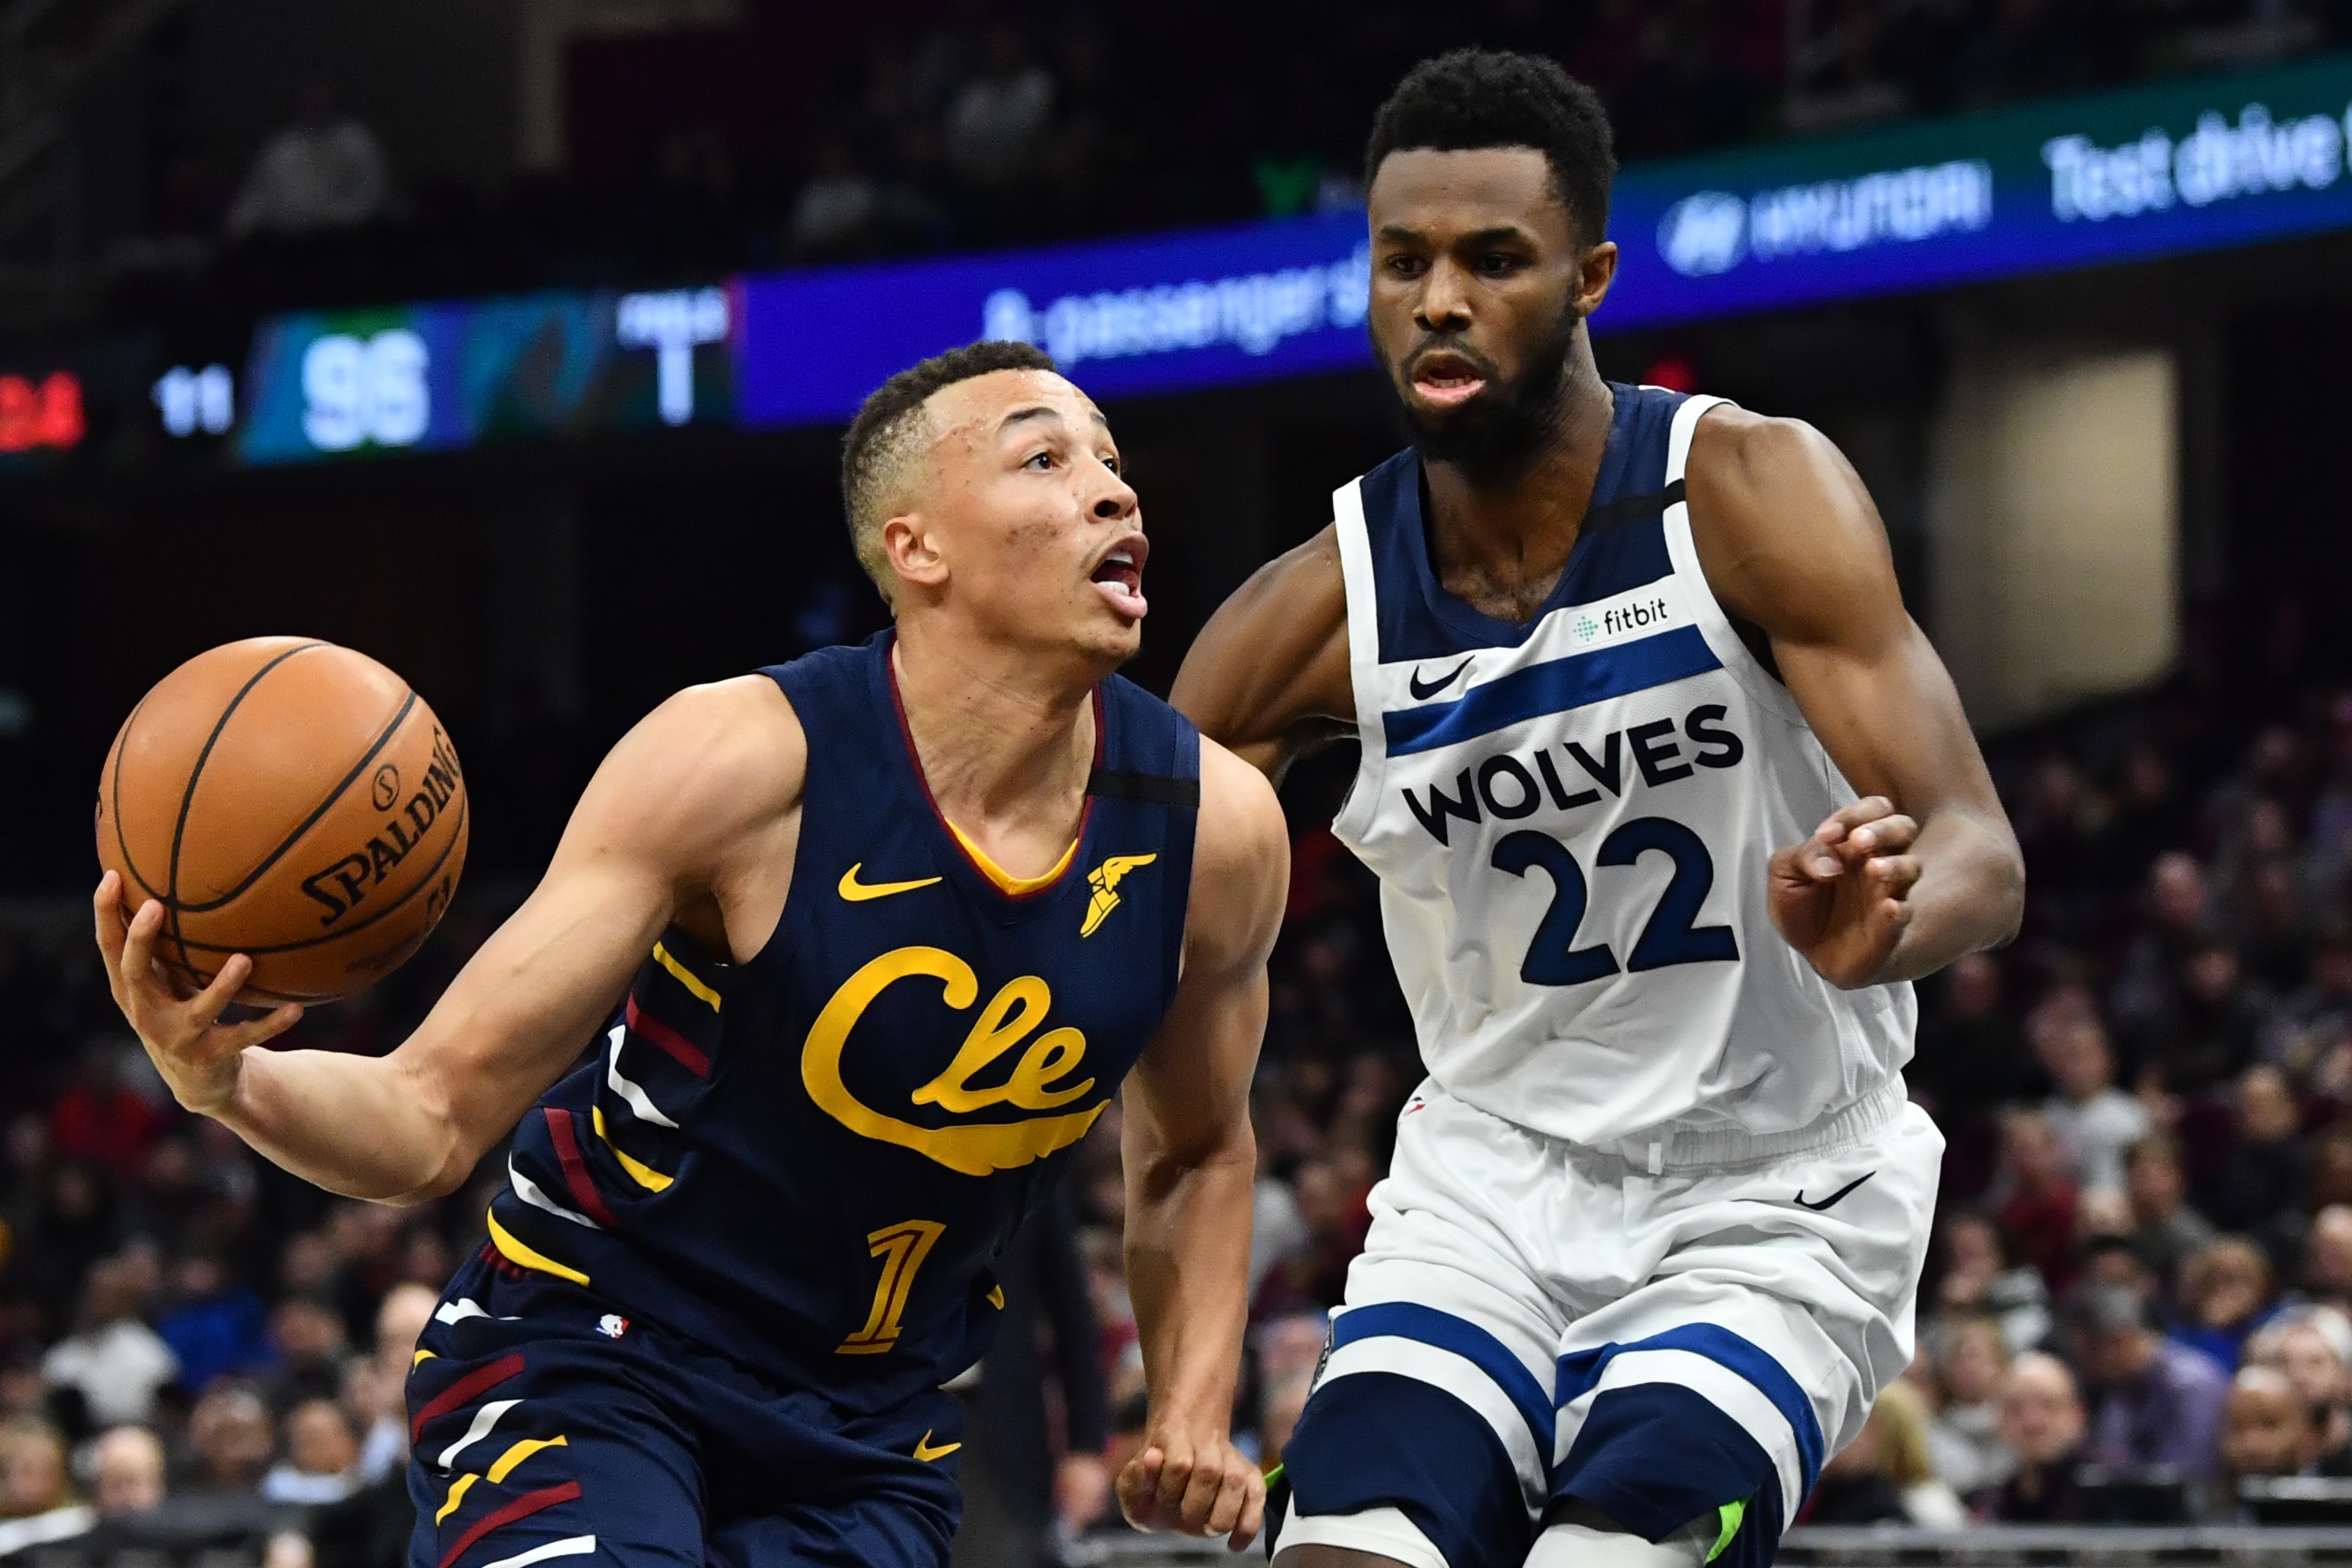 Dribbles: Exum Soars as Shorthanded Cavs Ultimately Grounded